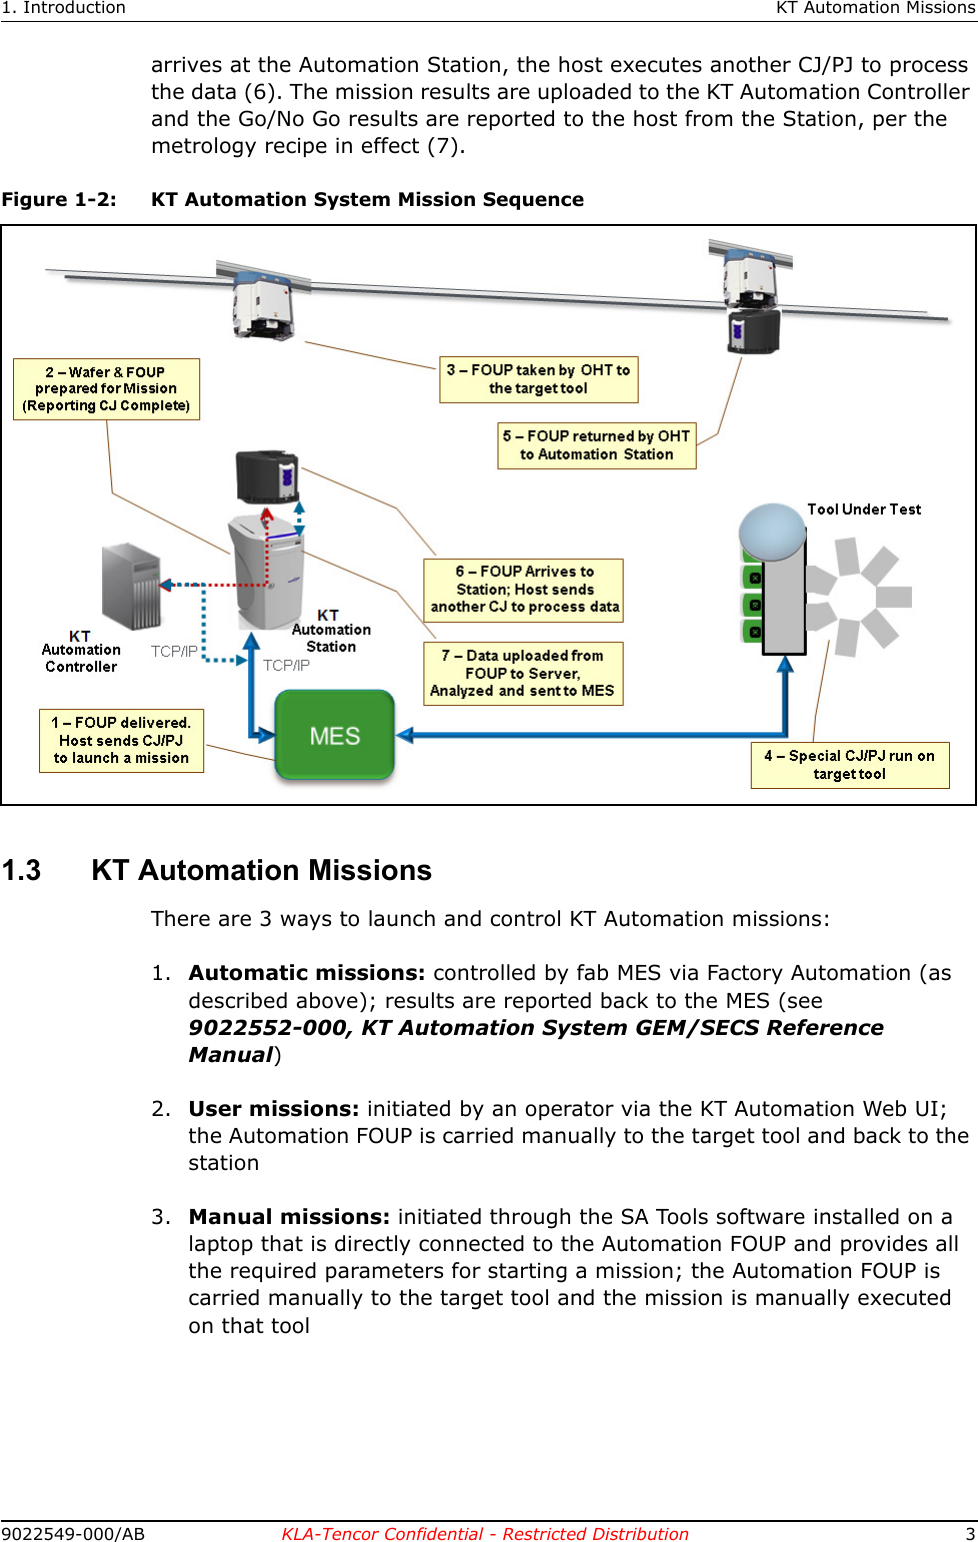 1. Introduction KT Automation Missions9022549-000/AB KLA-Tencor Confidential - Restricted Distribution 3arrives at the Automation Station, the host executes another CJ/PJ to process the data (6). The mission results are uploaded to the KT Automation Controller and the Go/No Go results are reported to the host from the Station, per the metrology recipe in effect (7).1.3 KT Automation MissionsThere are 3 ways to launch and control KT Automation missions:1. Automatic missions: controlled by fab MES via Factory Automation (as described above); results are reported back to the MES (see 9022552-000, KT Automation System GEM/SECS Reference Manual)2. User missions: initiated by an operator via the KT Automation Web UI; the Automation FOUP is carried manually to the target tool and back to the station 3. Manual missions: initiated through the SA Tools software installed on a laptop that is directly connected to the Automation FOUP and provides all the required parameters for starting a mission; the Automation FOUP is carried manually to the target tool and the mission is manually executed on that toolFigure 1-2: KT Automation System Mission Sequence